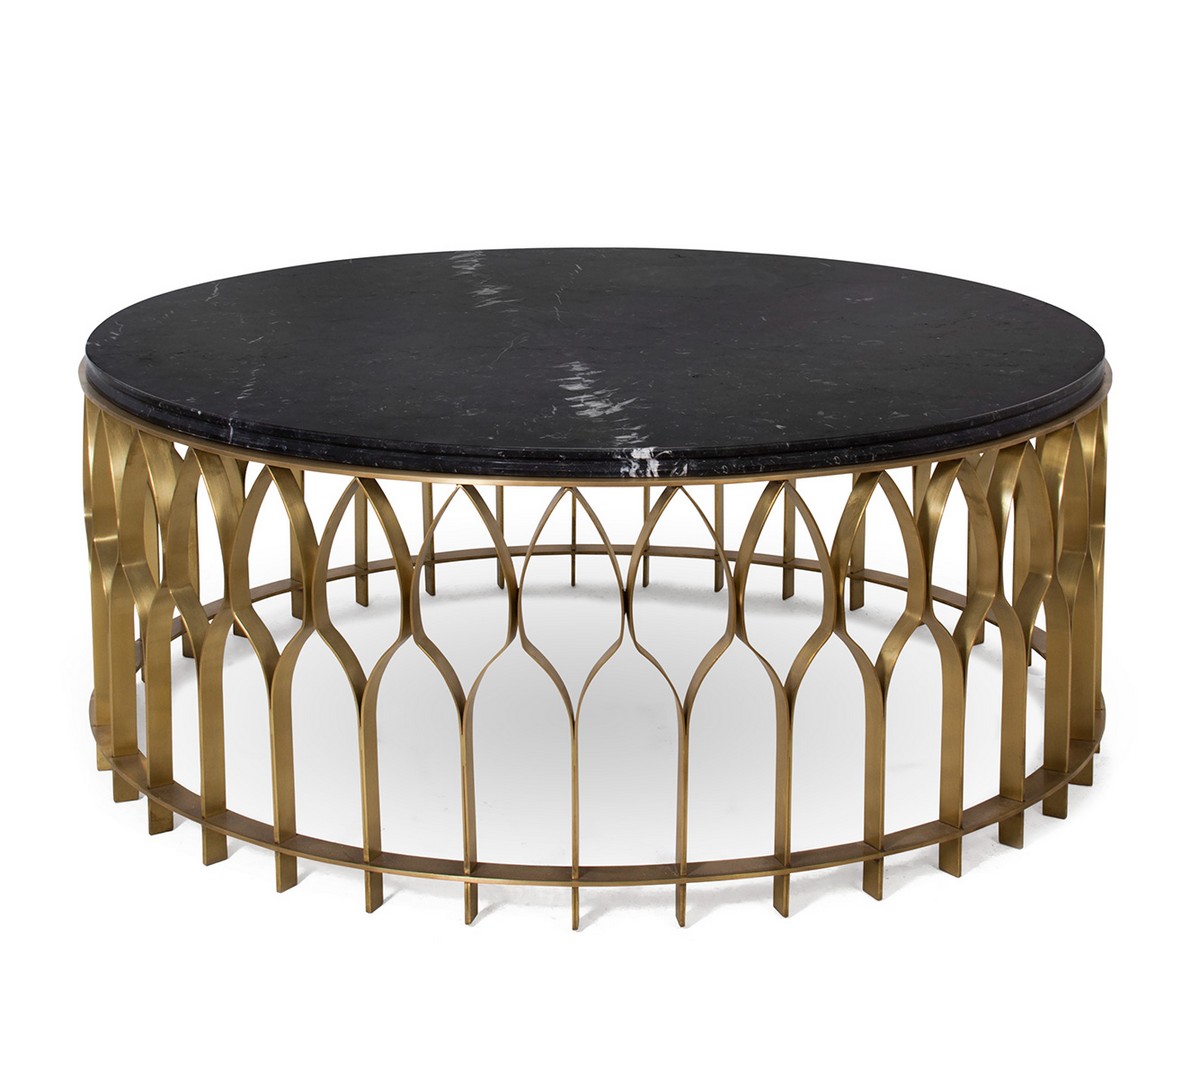 Luxurious Center Tables at Covet House Douro